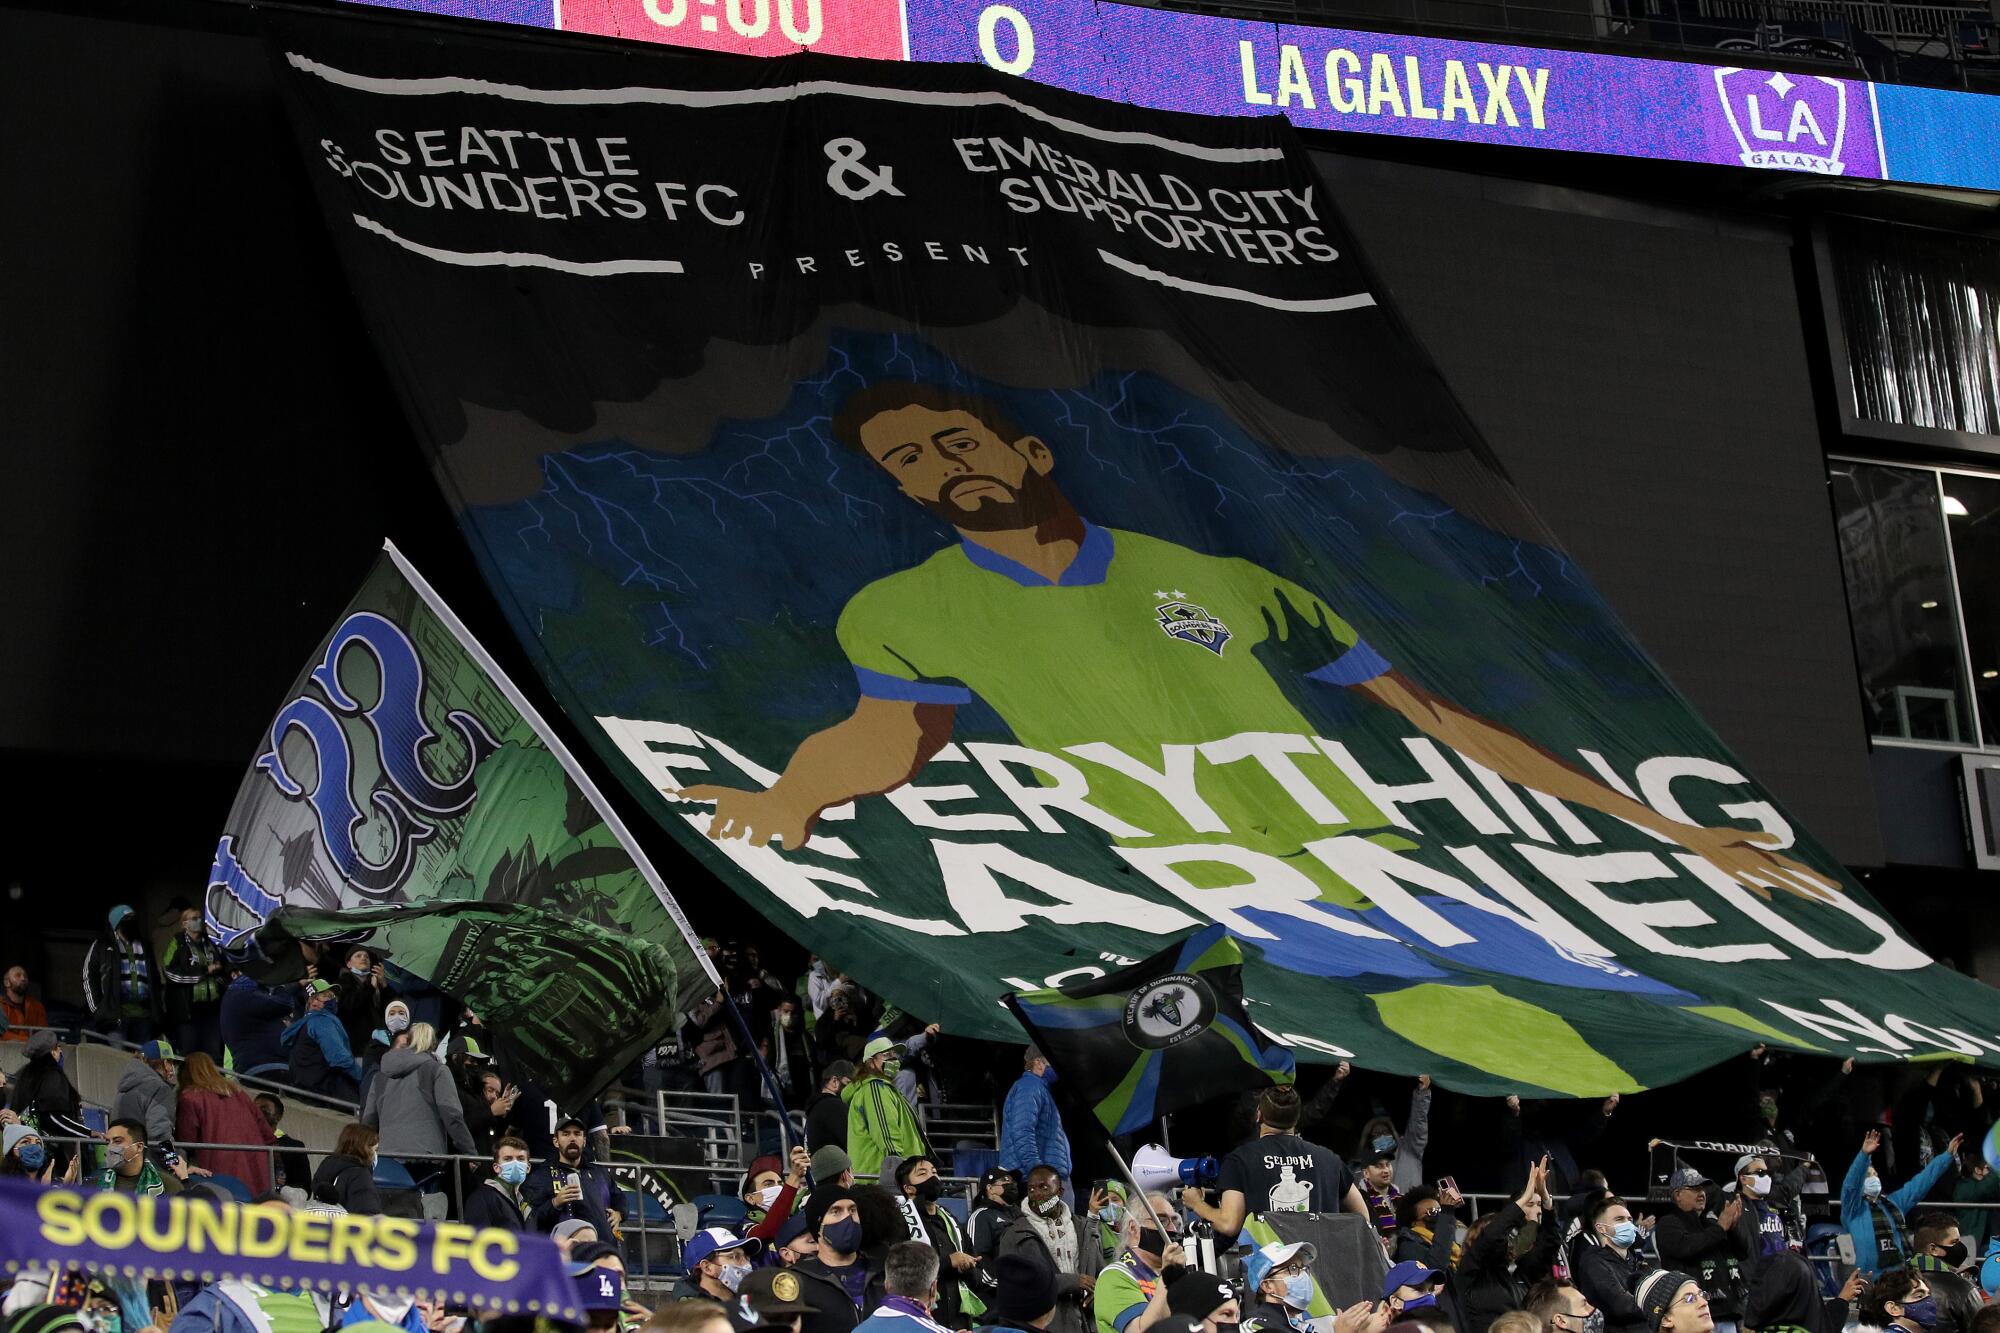 Sounders fans hold a banner before a game against LAFC earlier this season.